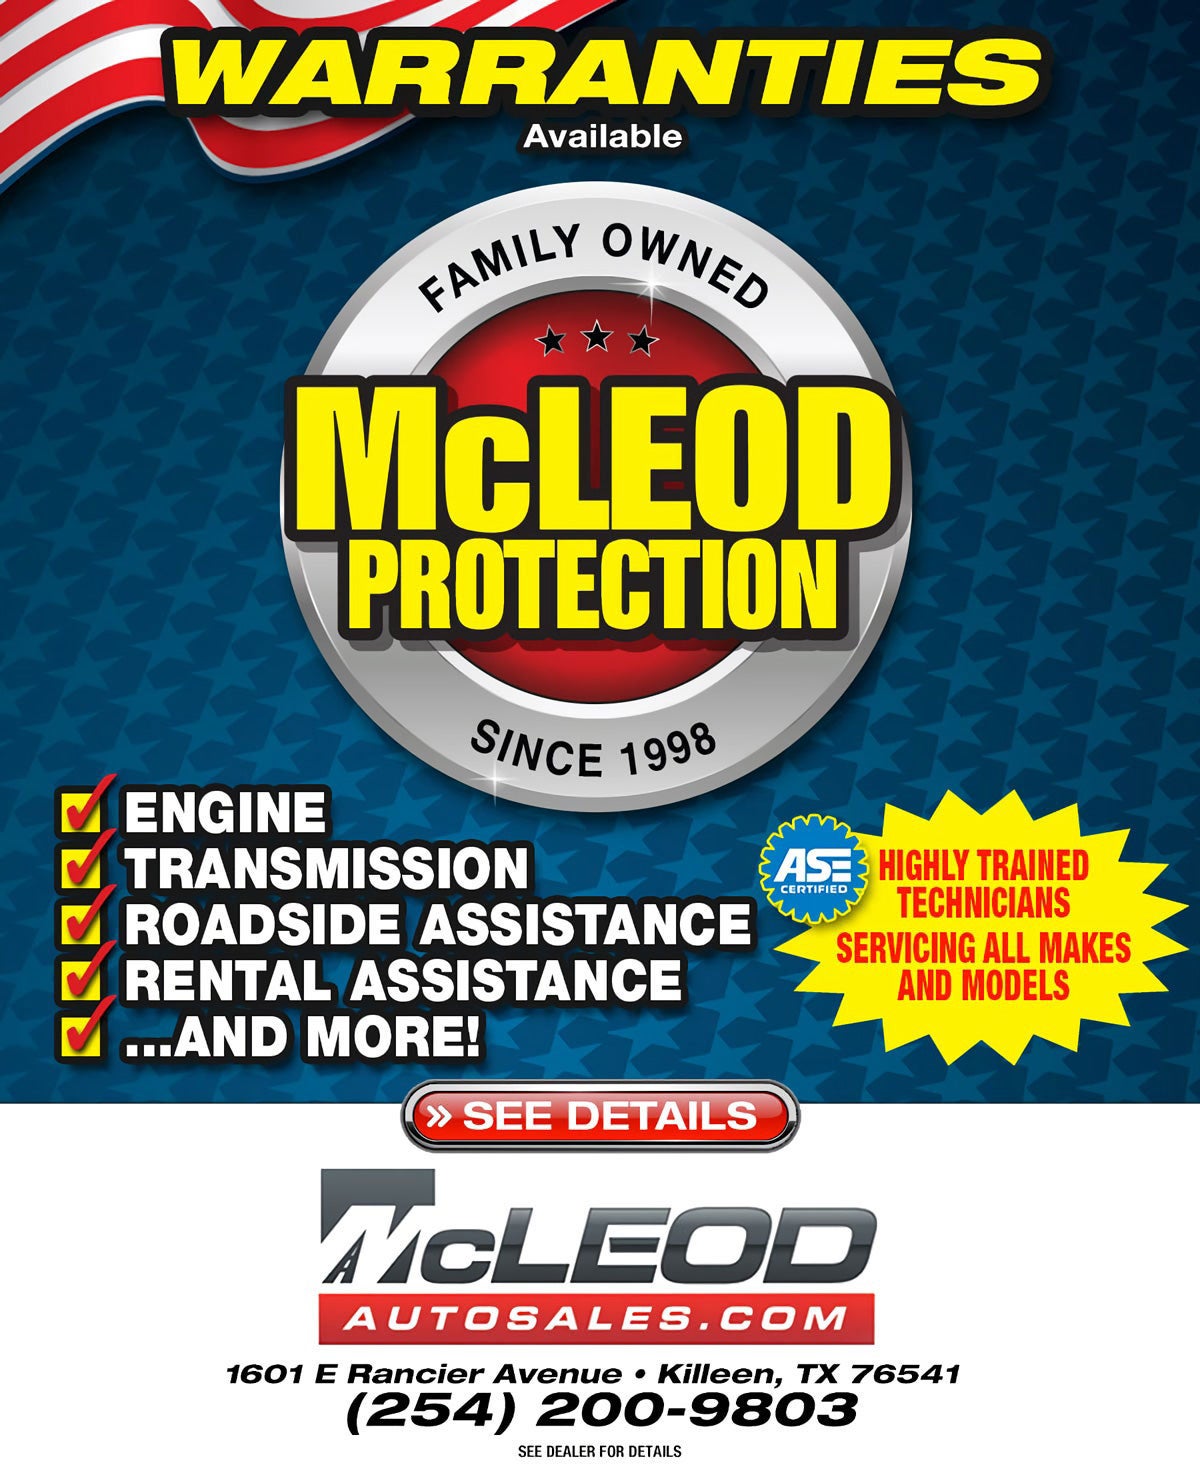 Warranties Available | McLeod Protection | See Details